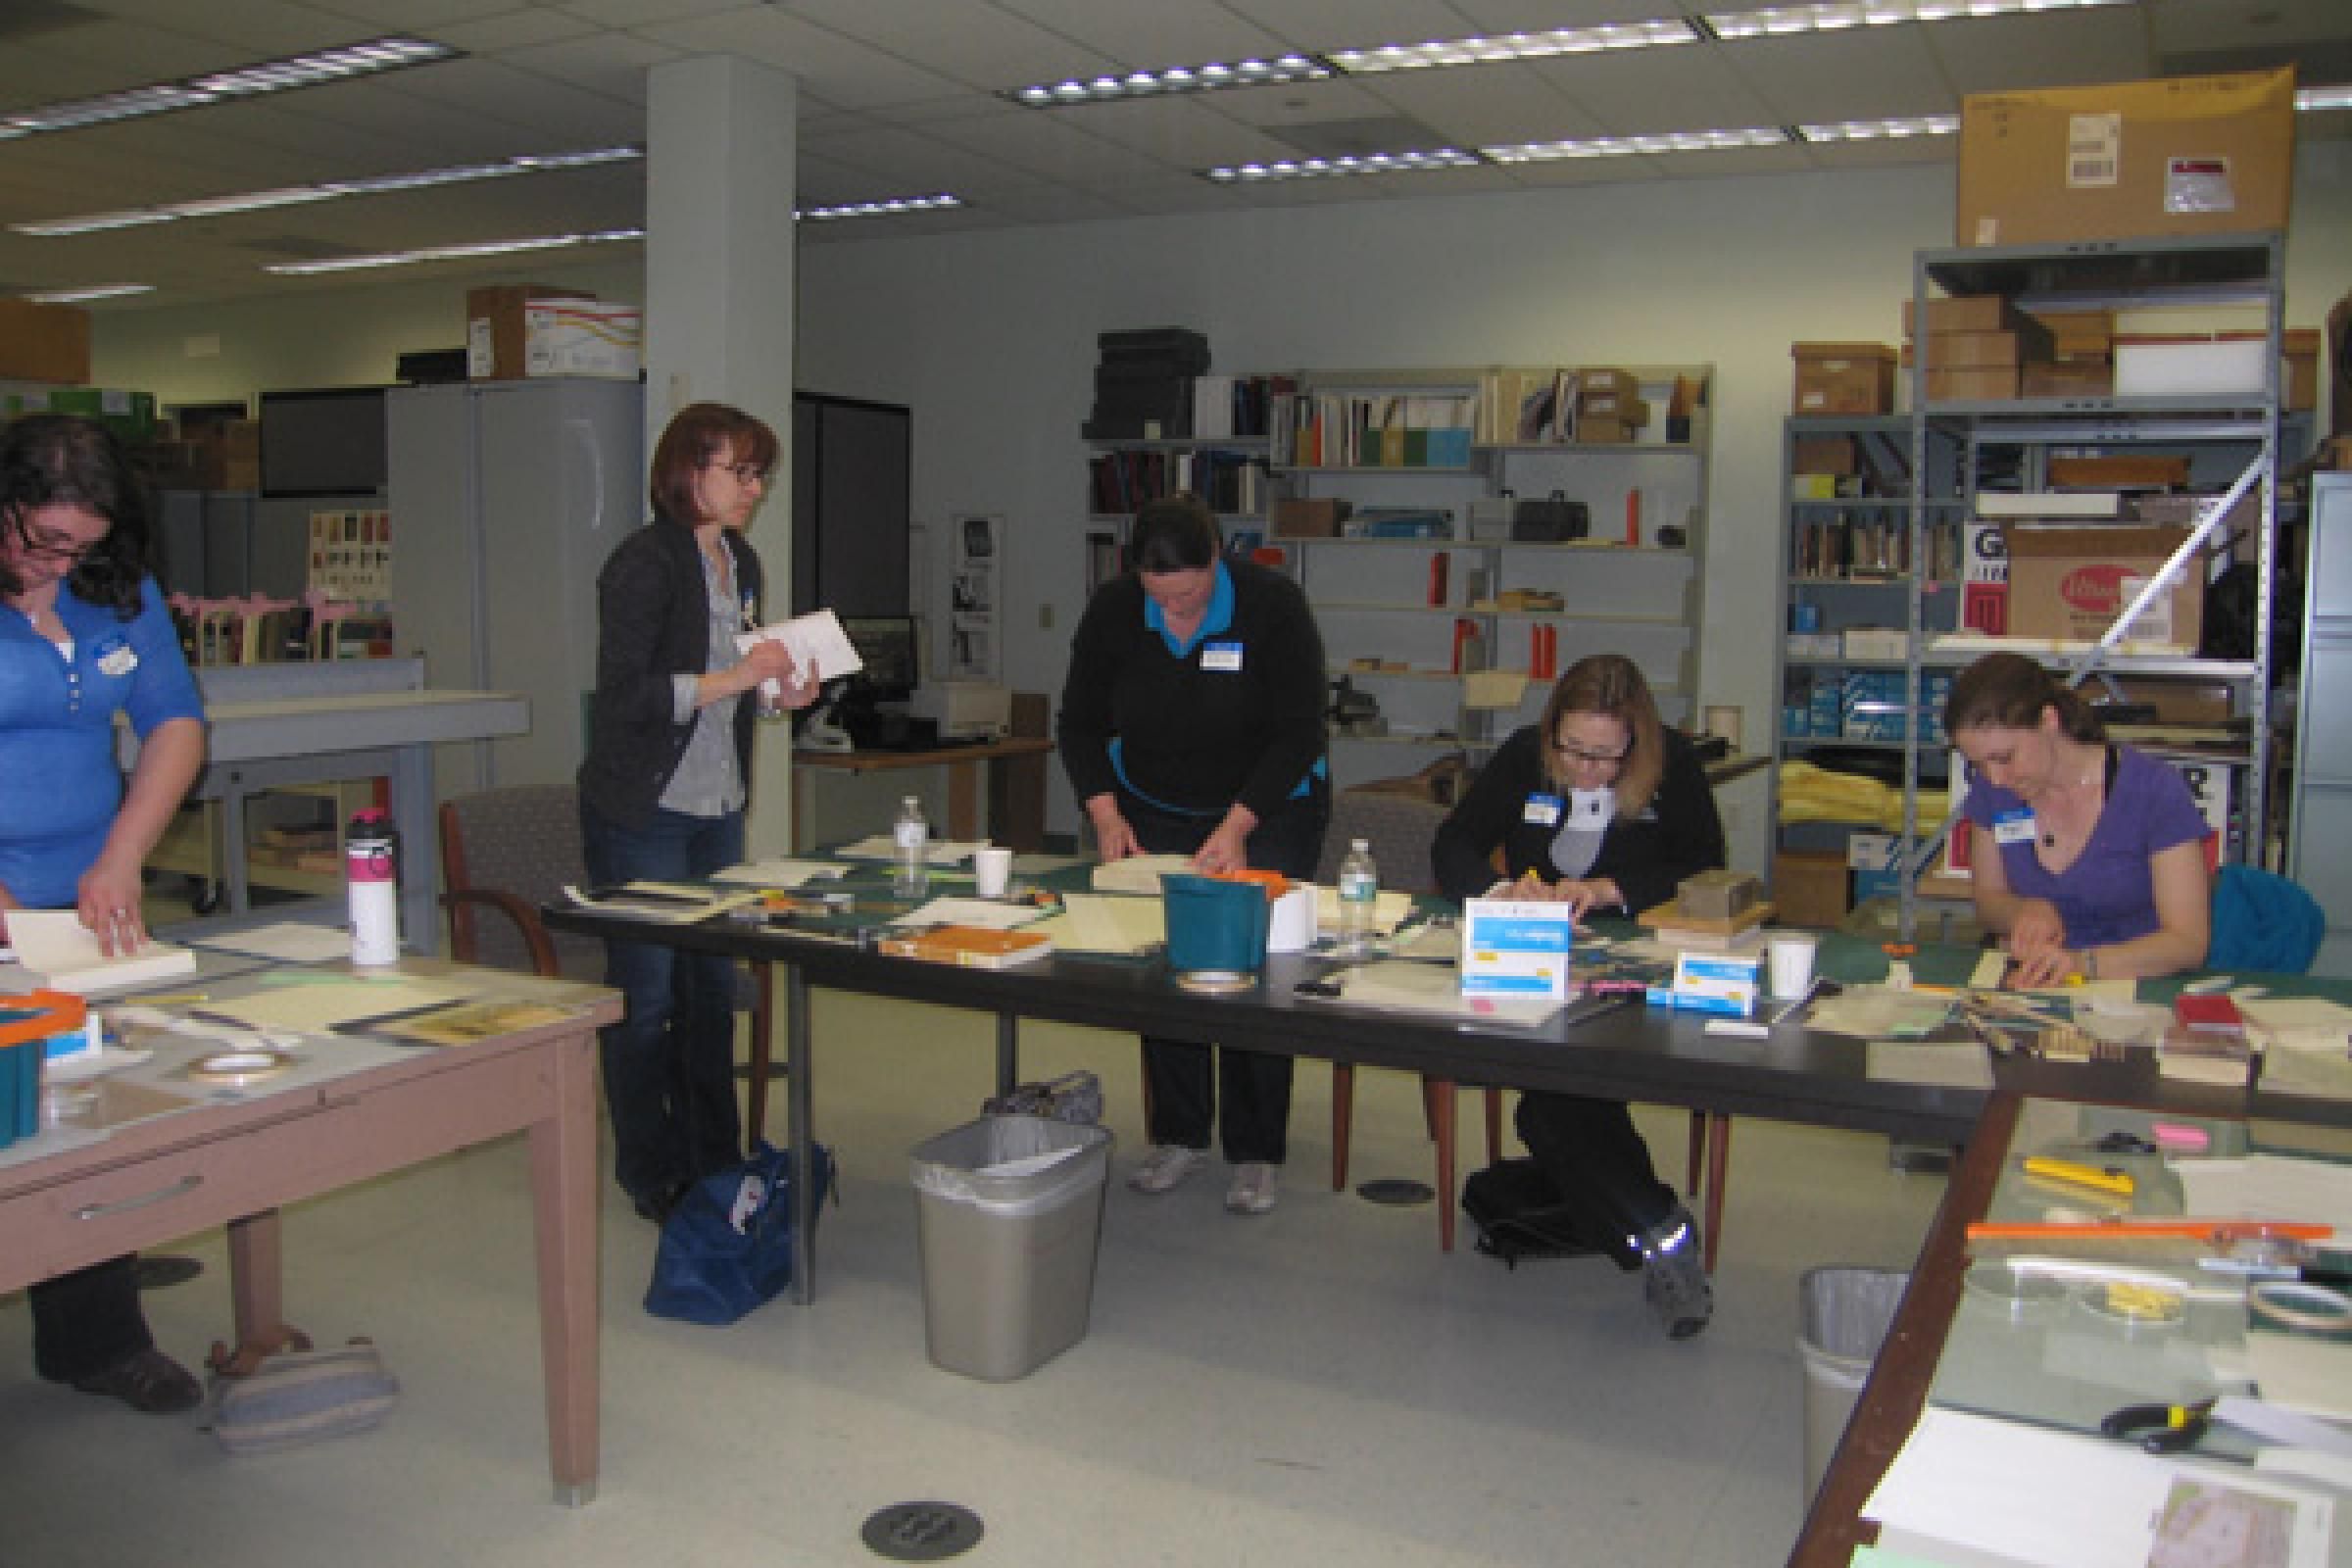  Students use their new knowledge to repair general collections items